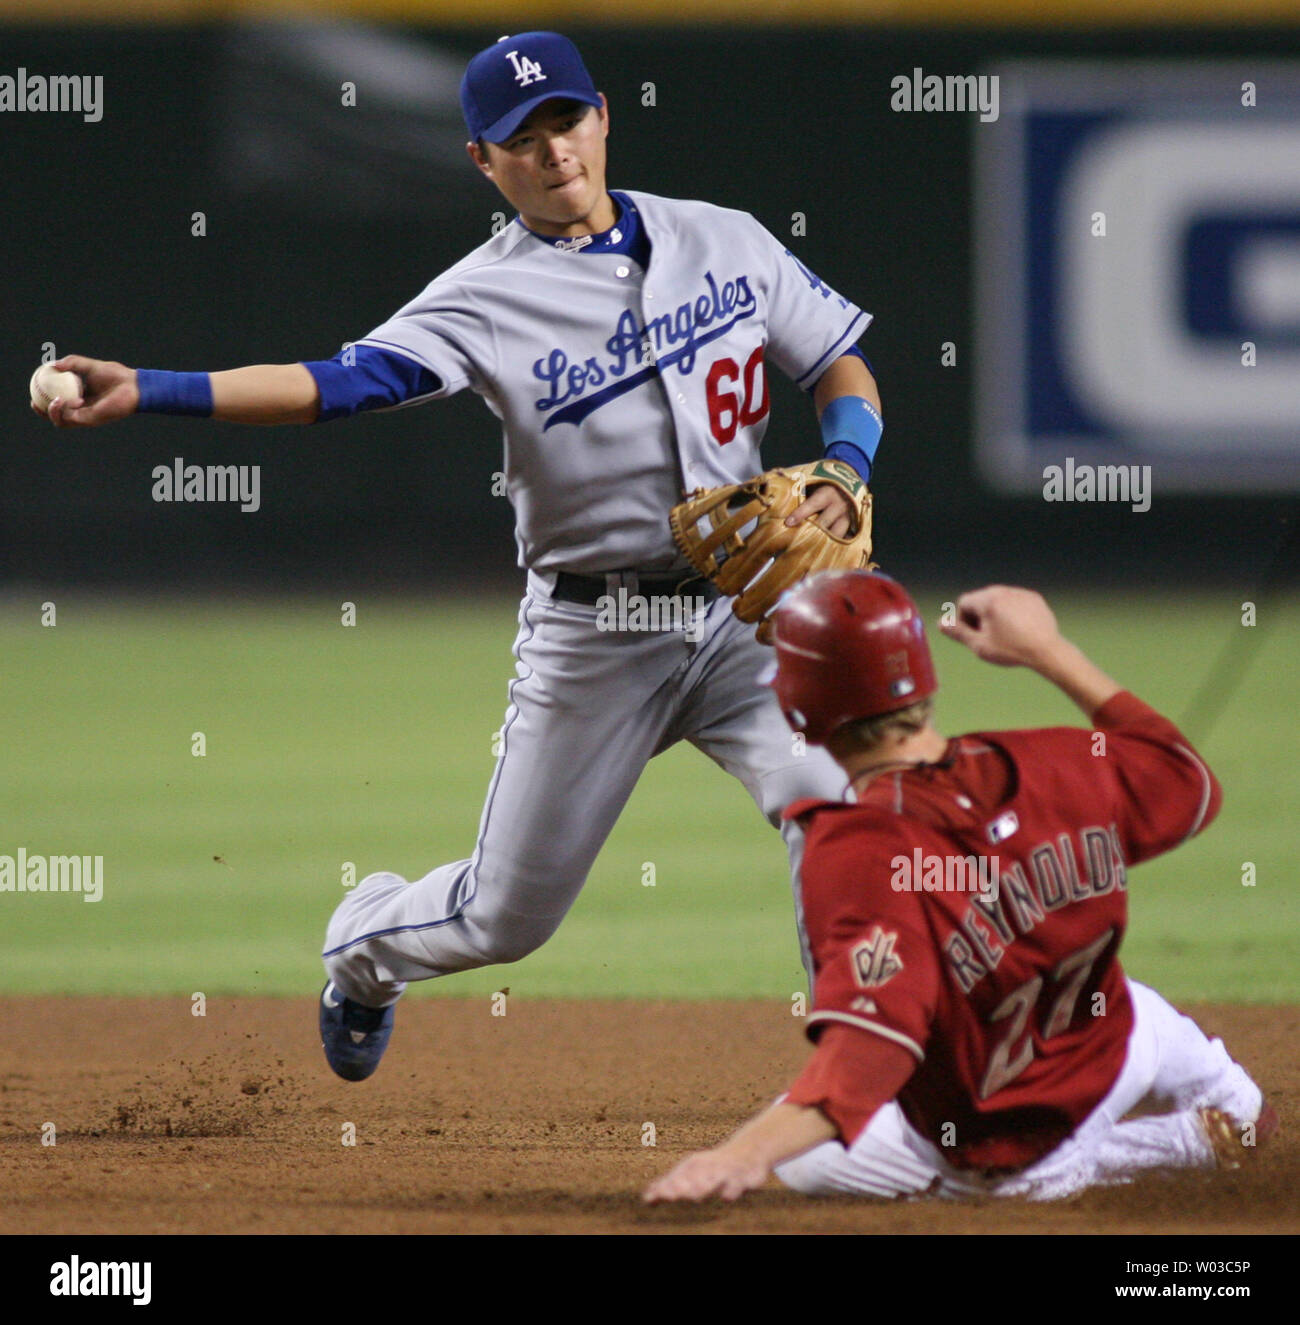 Los Angeles Dodgers shortstop Chin-Lung Hu, of Taiwan makes the relay throw for the double play as  Arizona Diamondbacks Mark Reynolds (R) slide into second base during the fourth inning at Chase Field in Phoenix on September 23, 2007. (UPI Photo/Art Foxall) Stock Photo